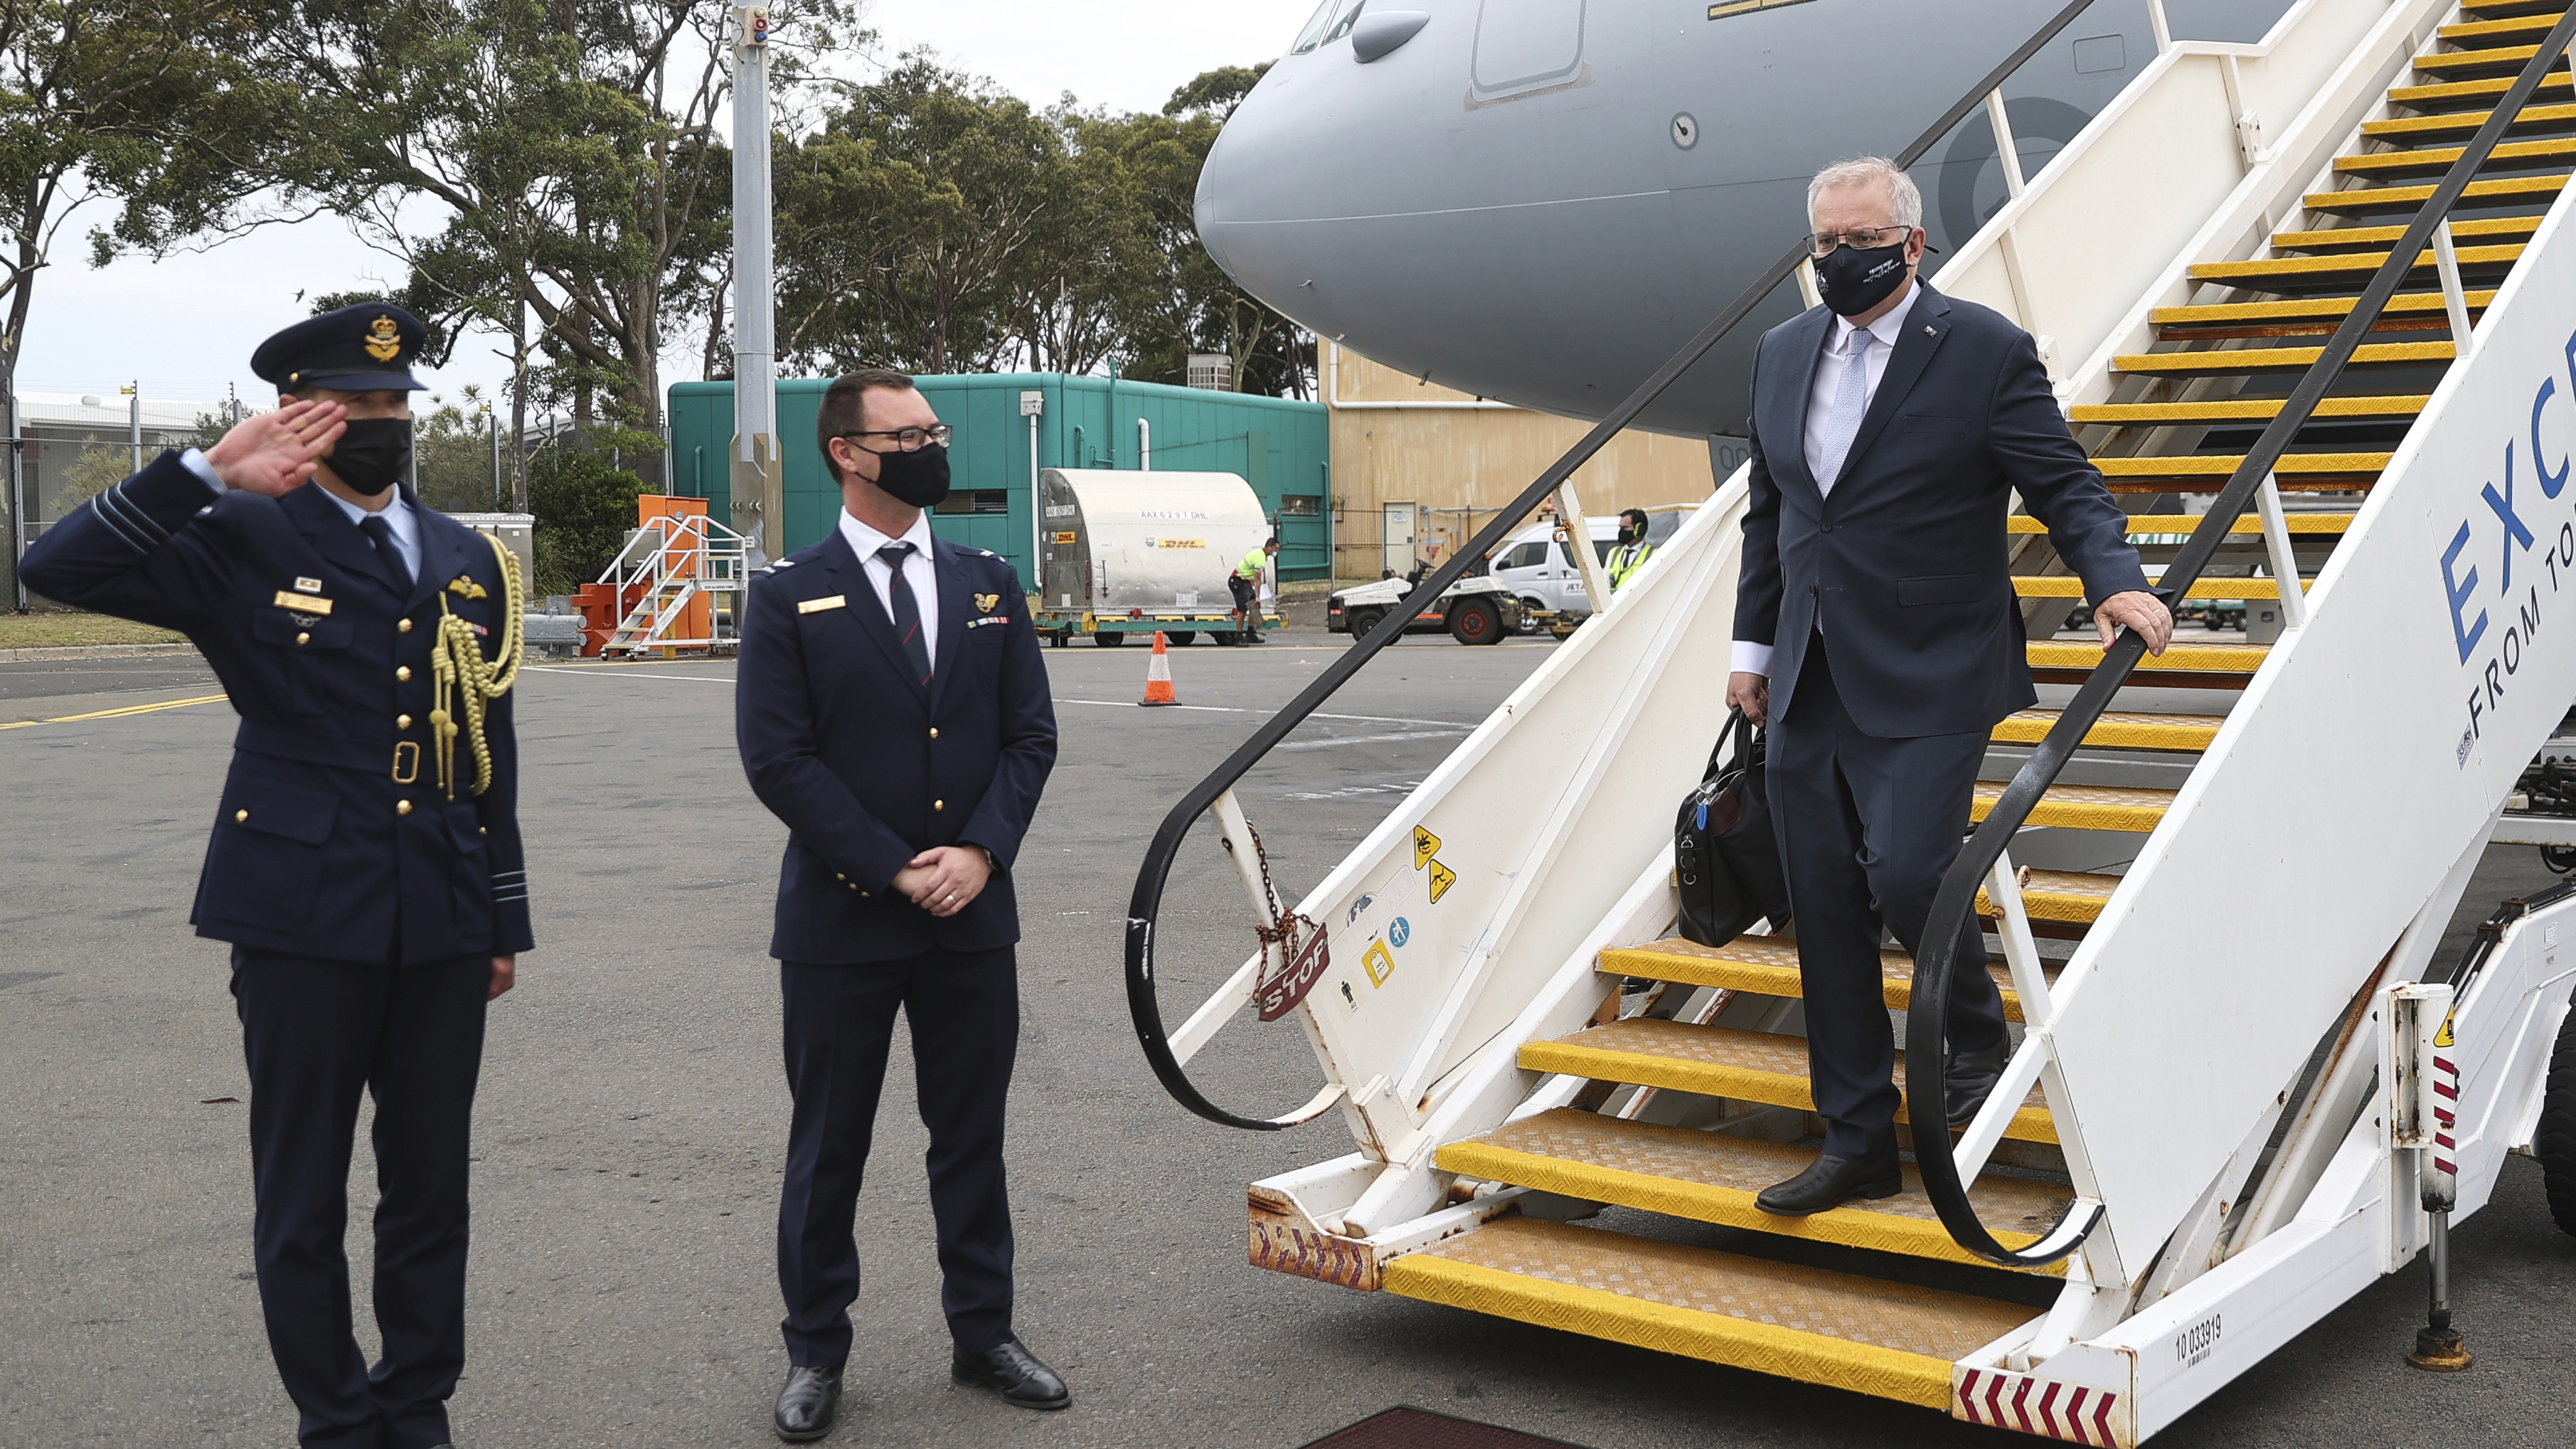 Prime Minister Scott Morrison arrives back in Sydney after his visit to the G20 Summit in Rome and COP26 in Glasgow.